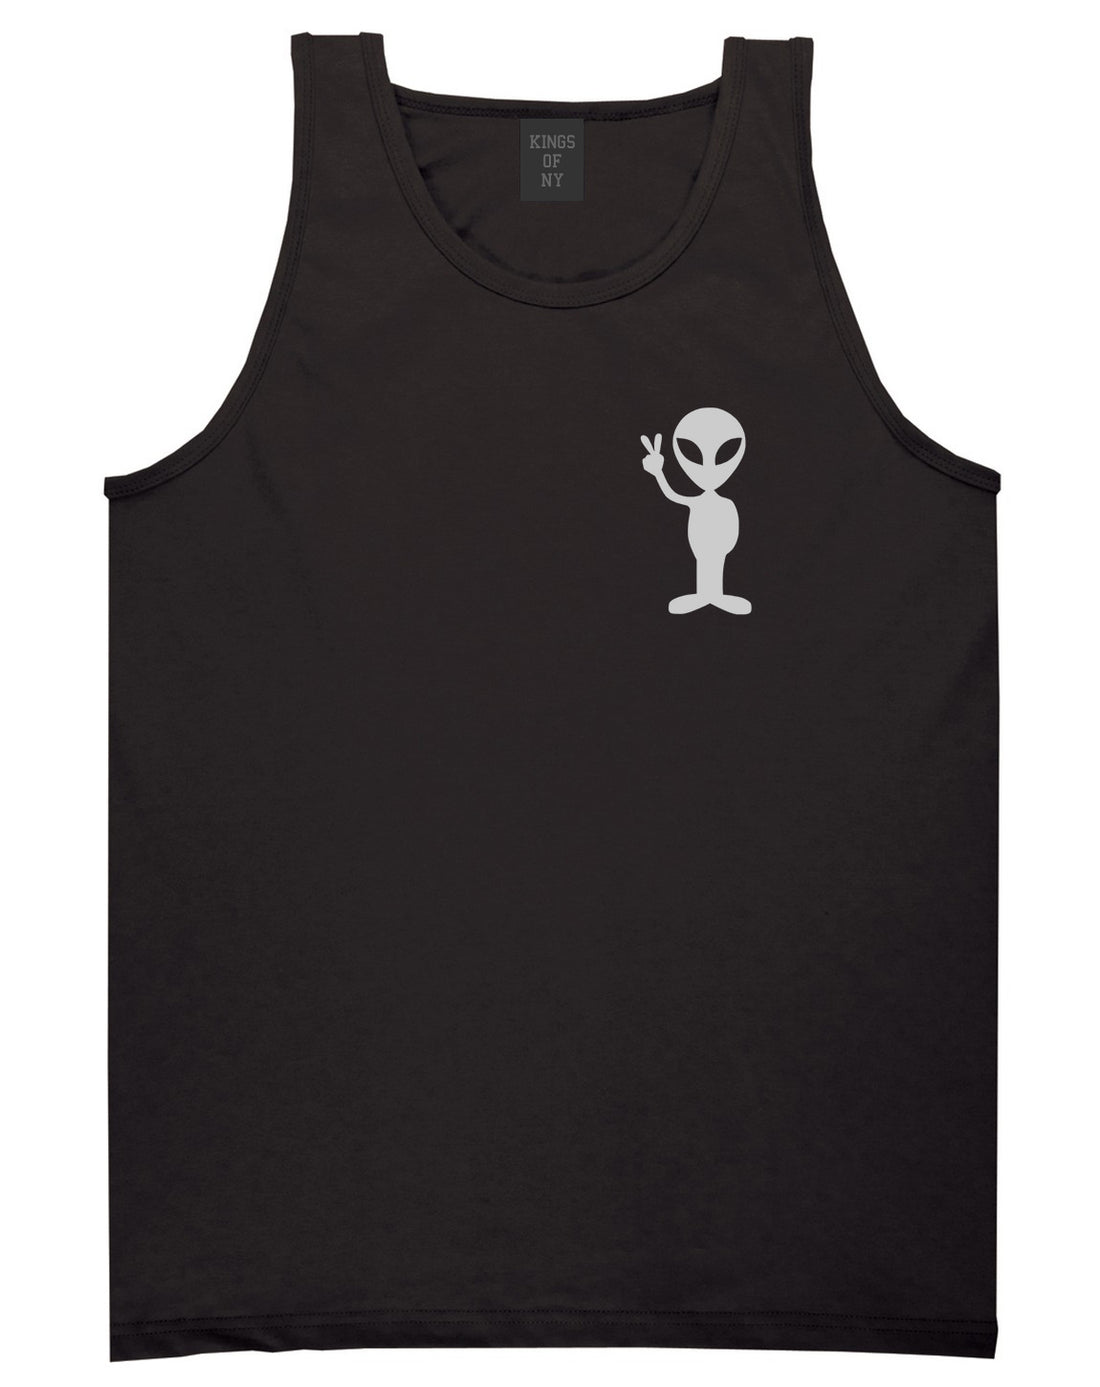 Alien Peace Sign Chest Black Tank Top Shirt by Kings Of NY